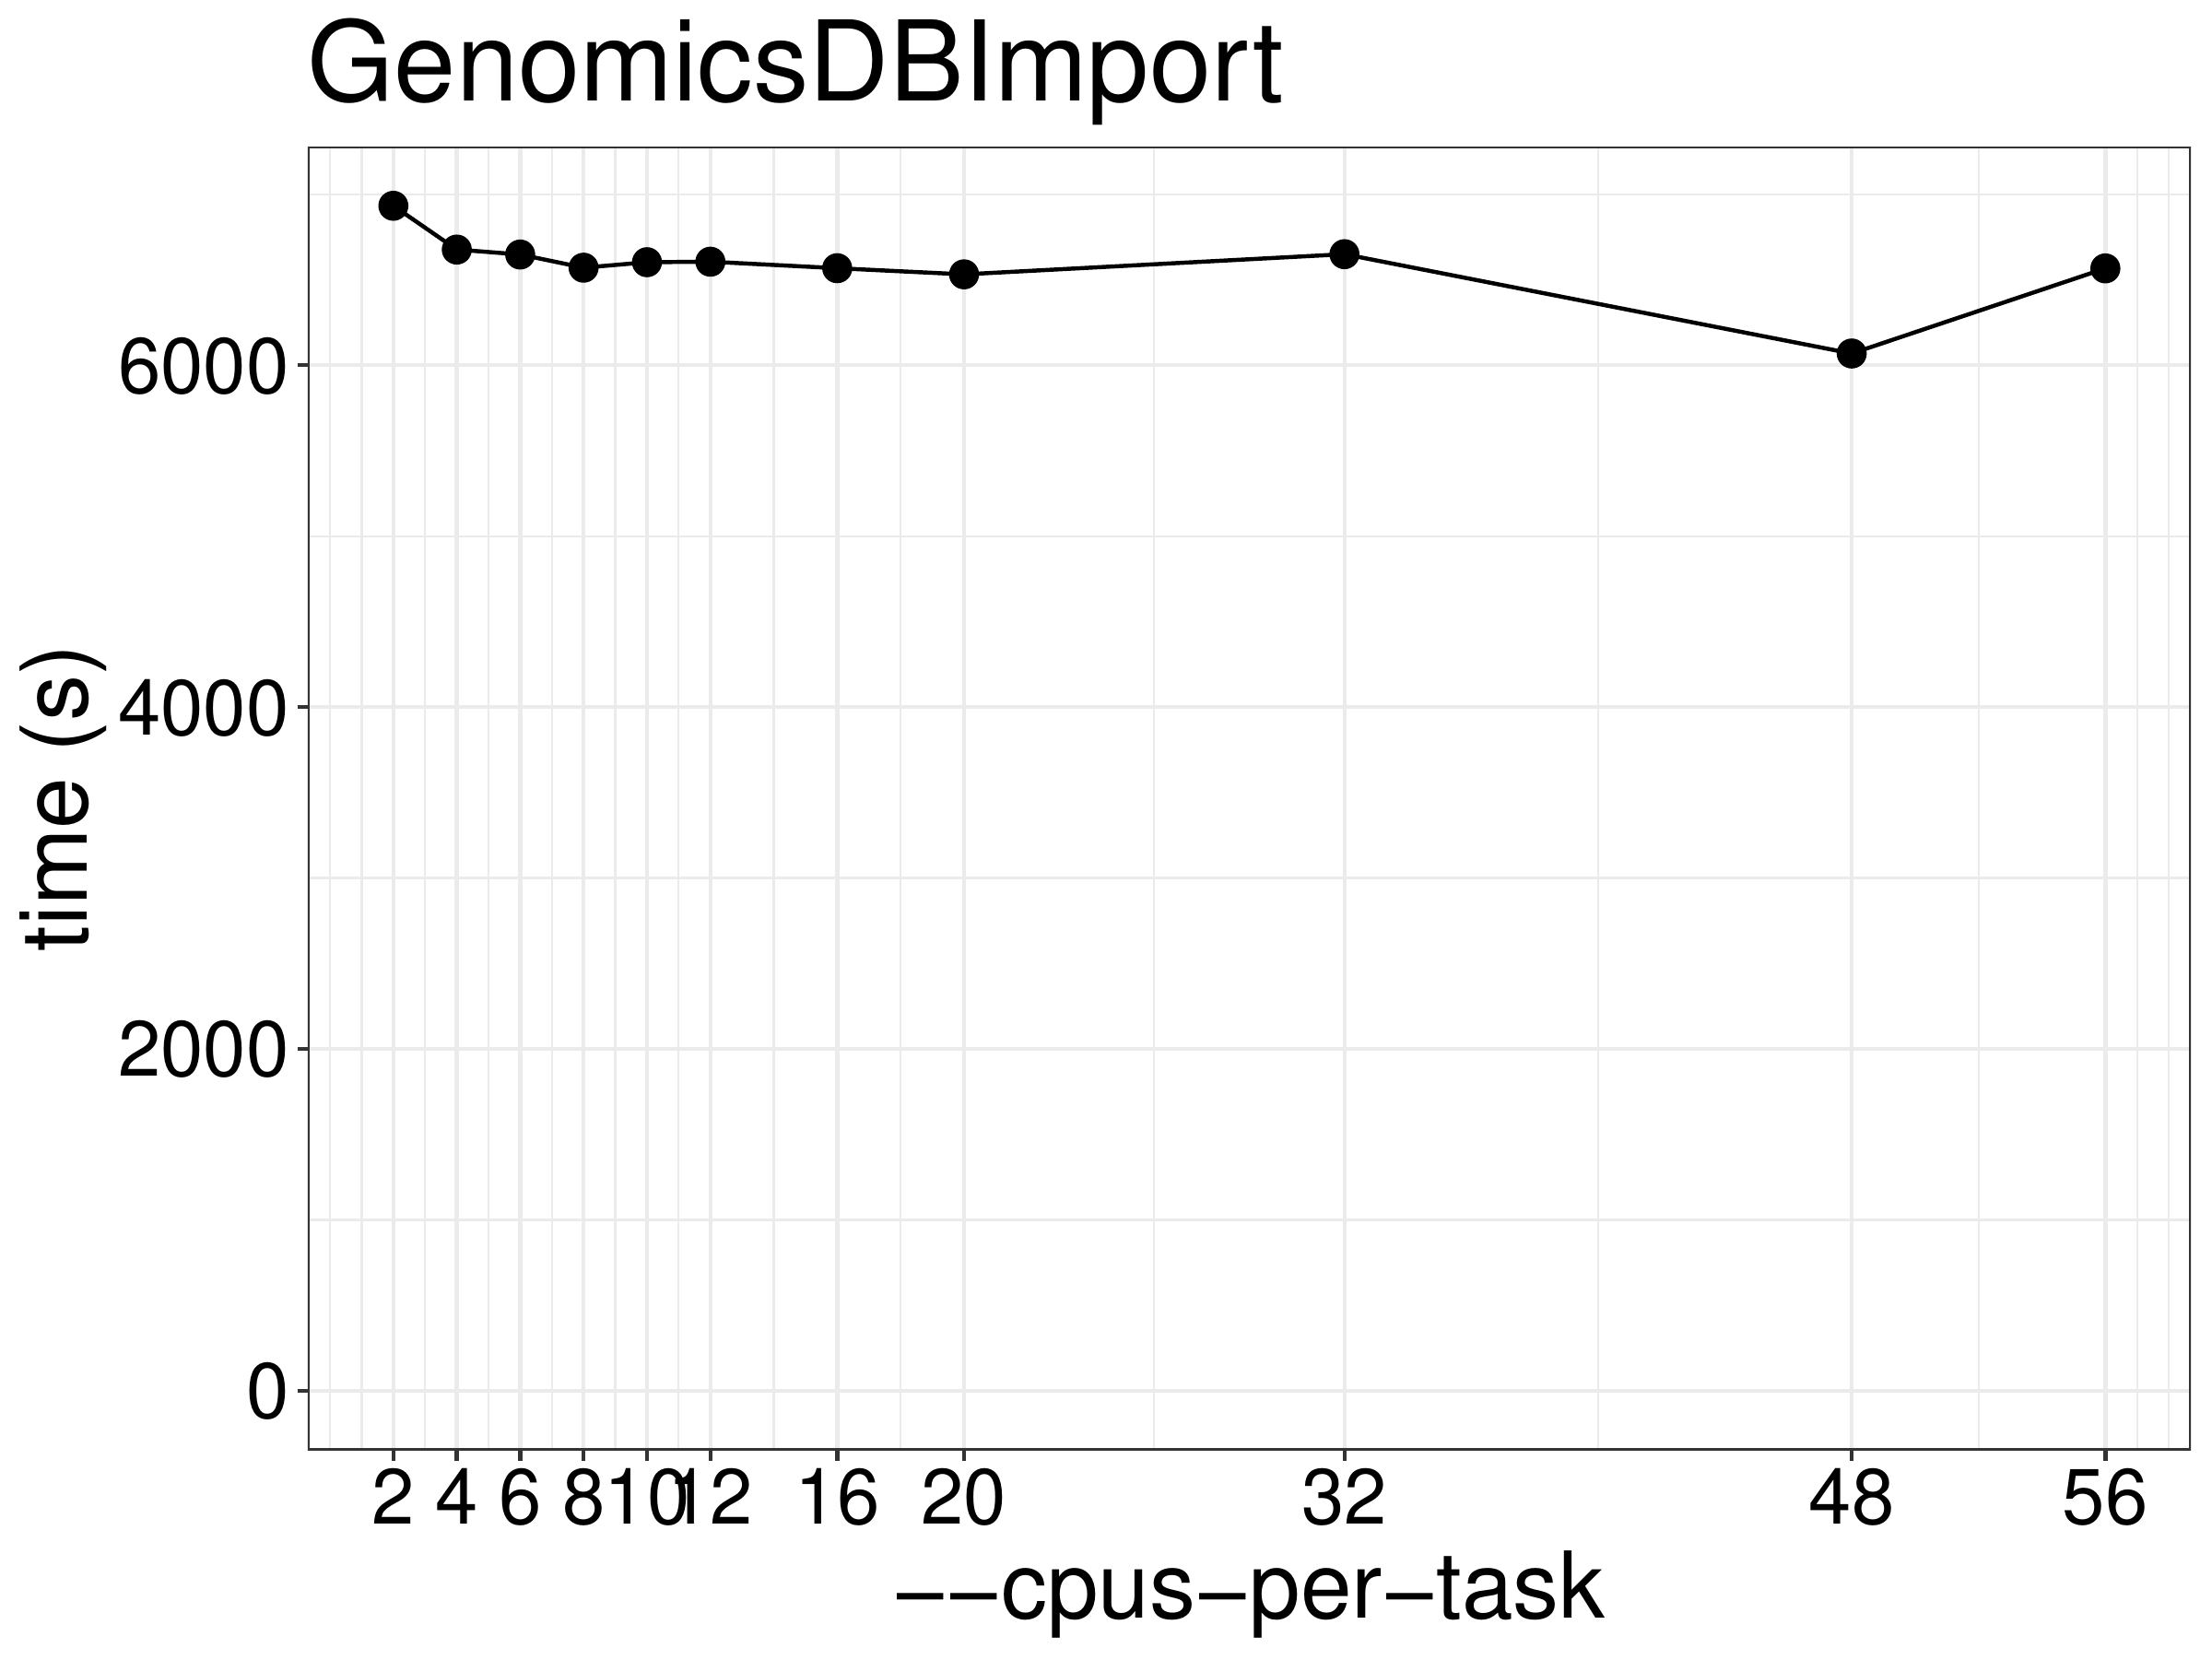 Runtime of GenomicsDBImport as a function of the number of threads